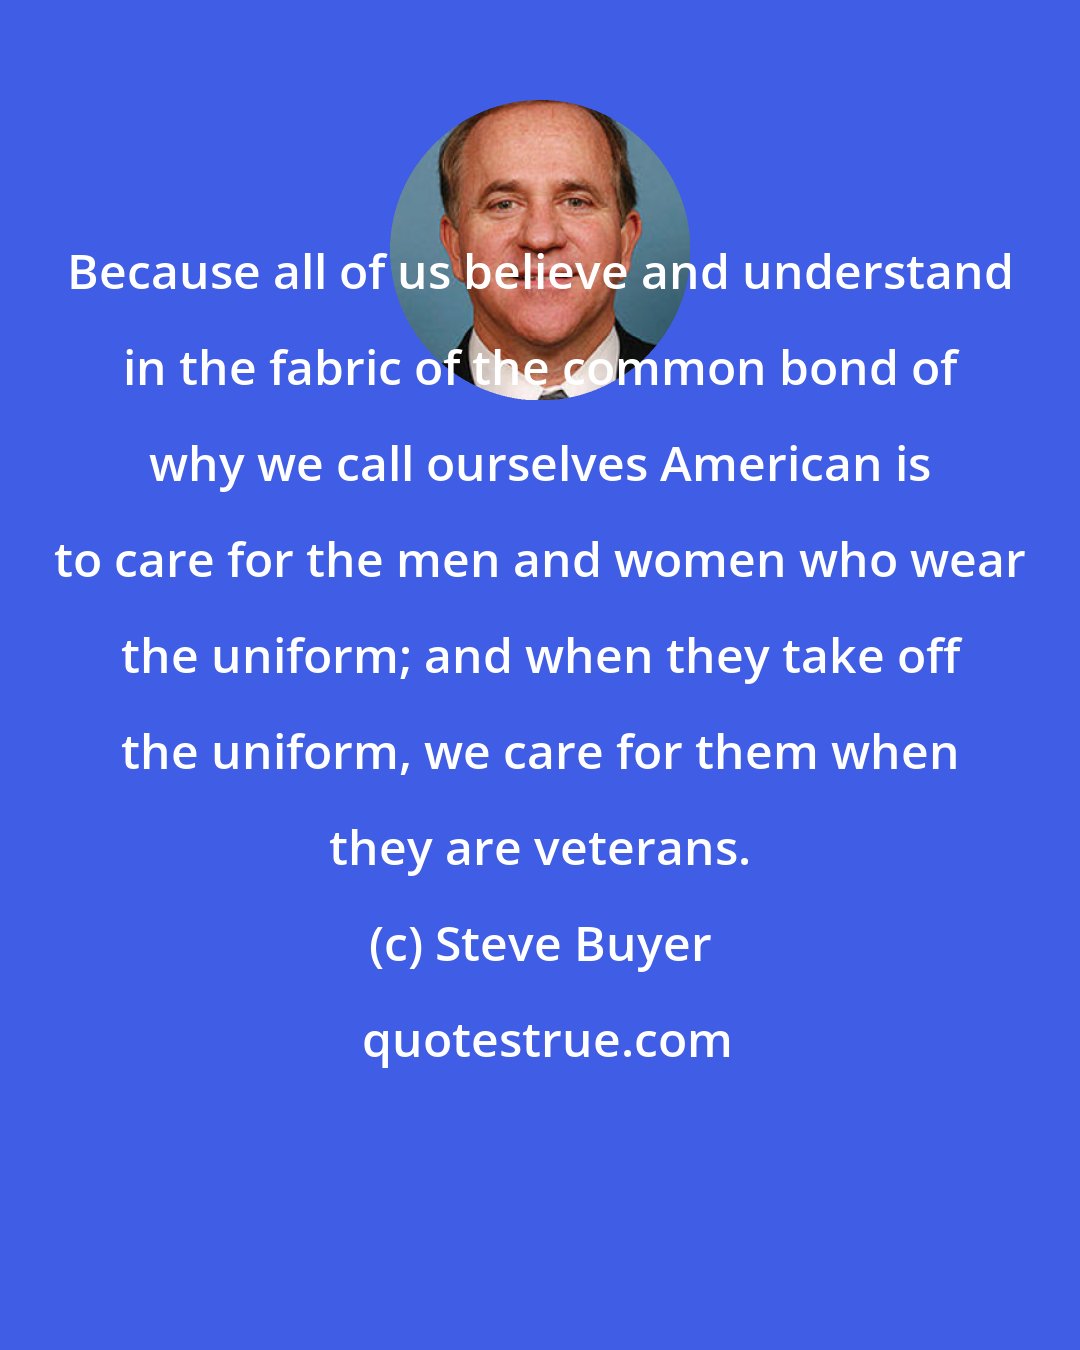 Steve Buyer: Because all of us believe and understand in the fabric of the common bond of why we call ourselves American is to care for the men and women who wear the uniform; and when they take off the uniform, we care for them when they are veterans.